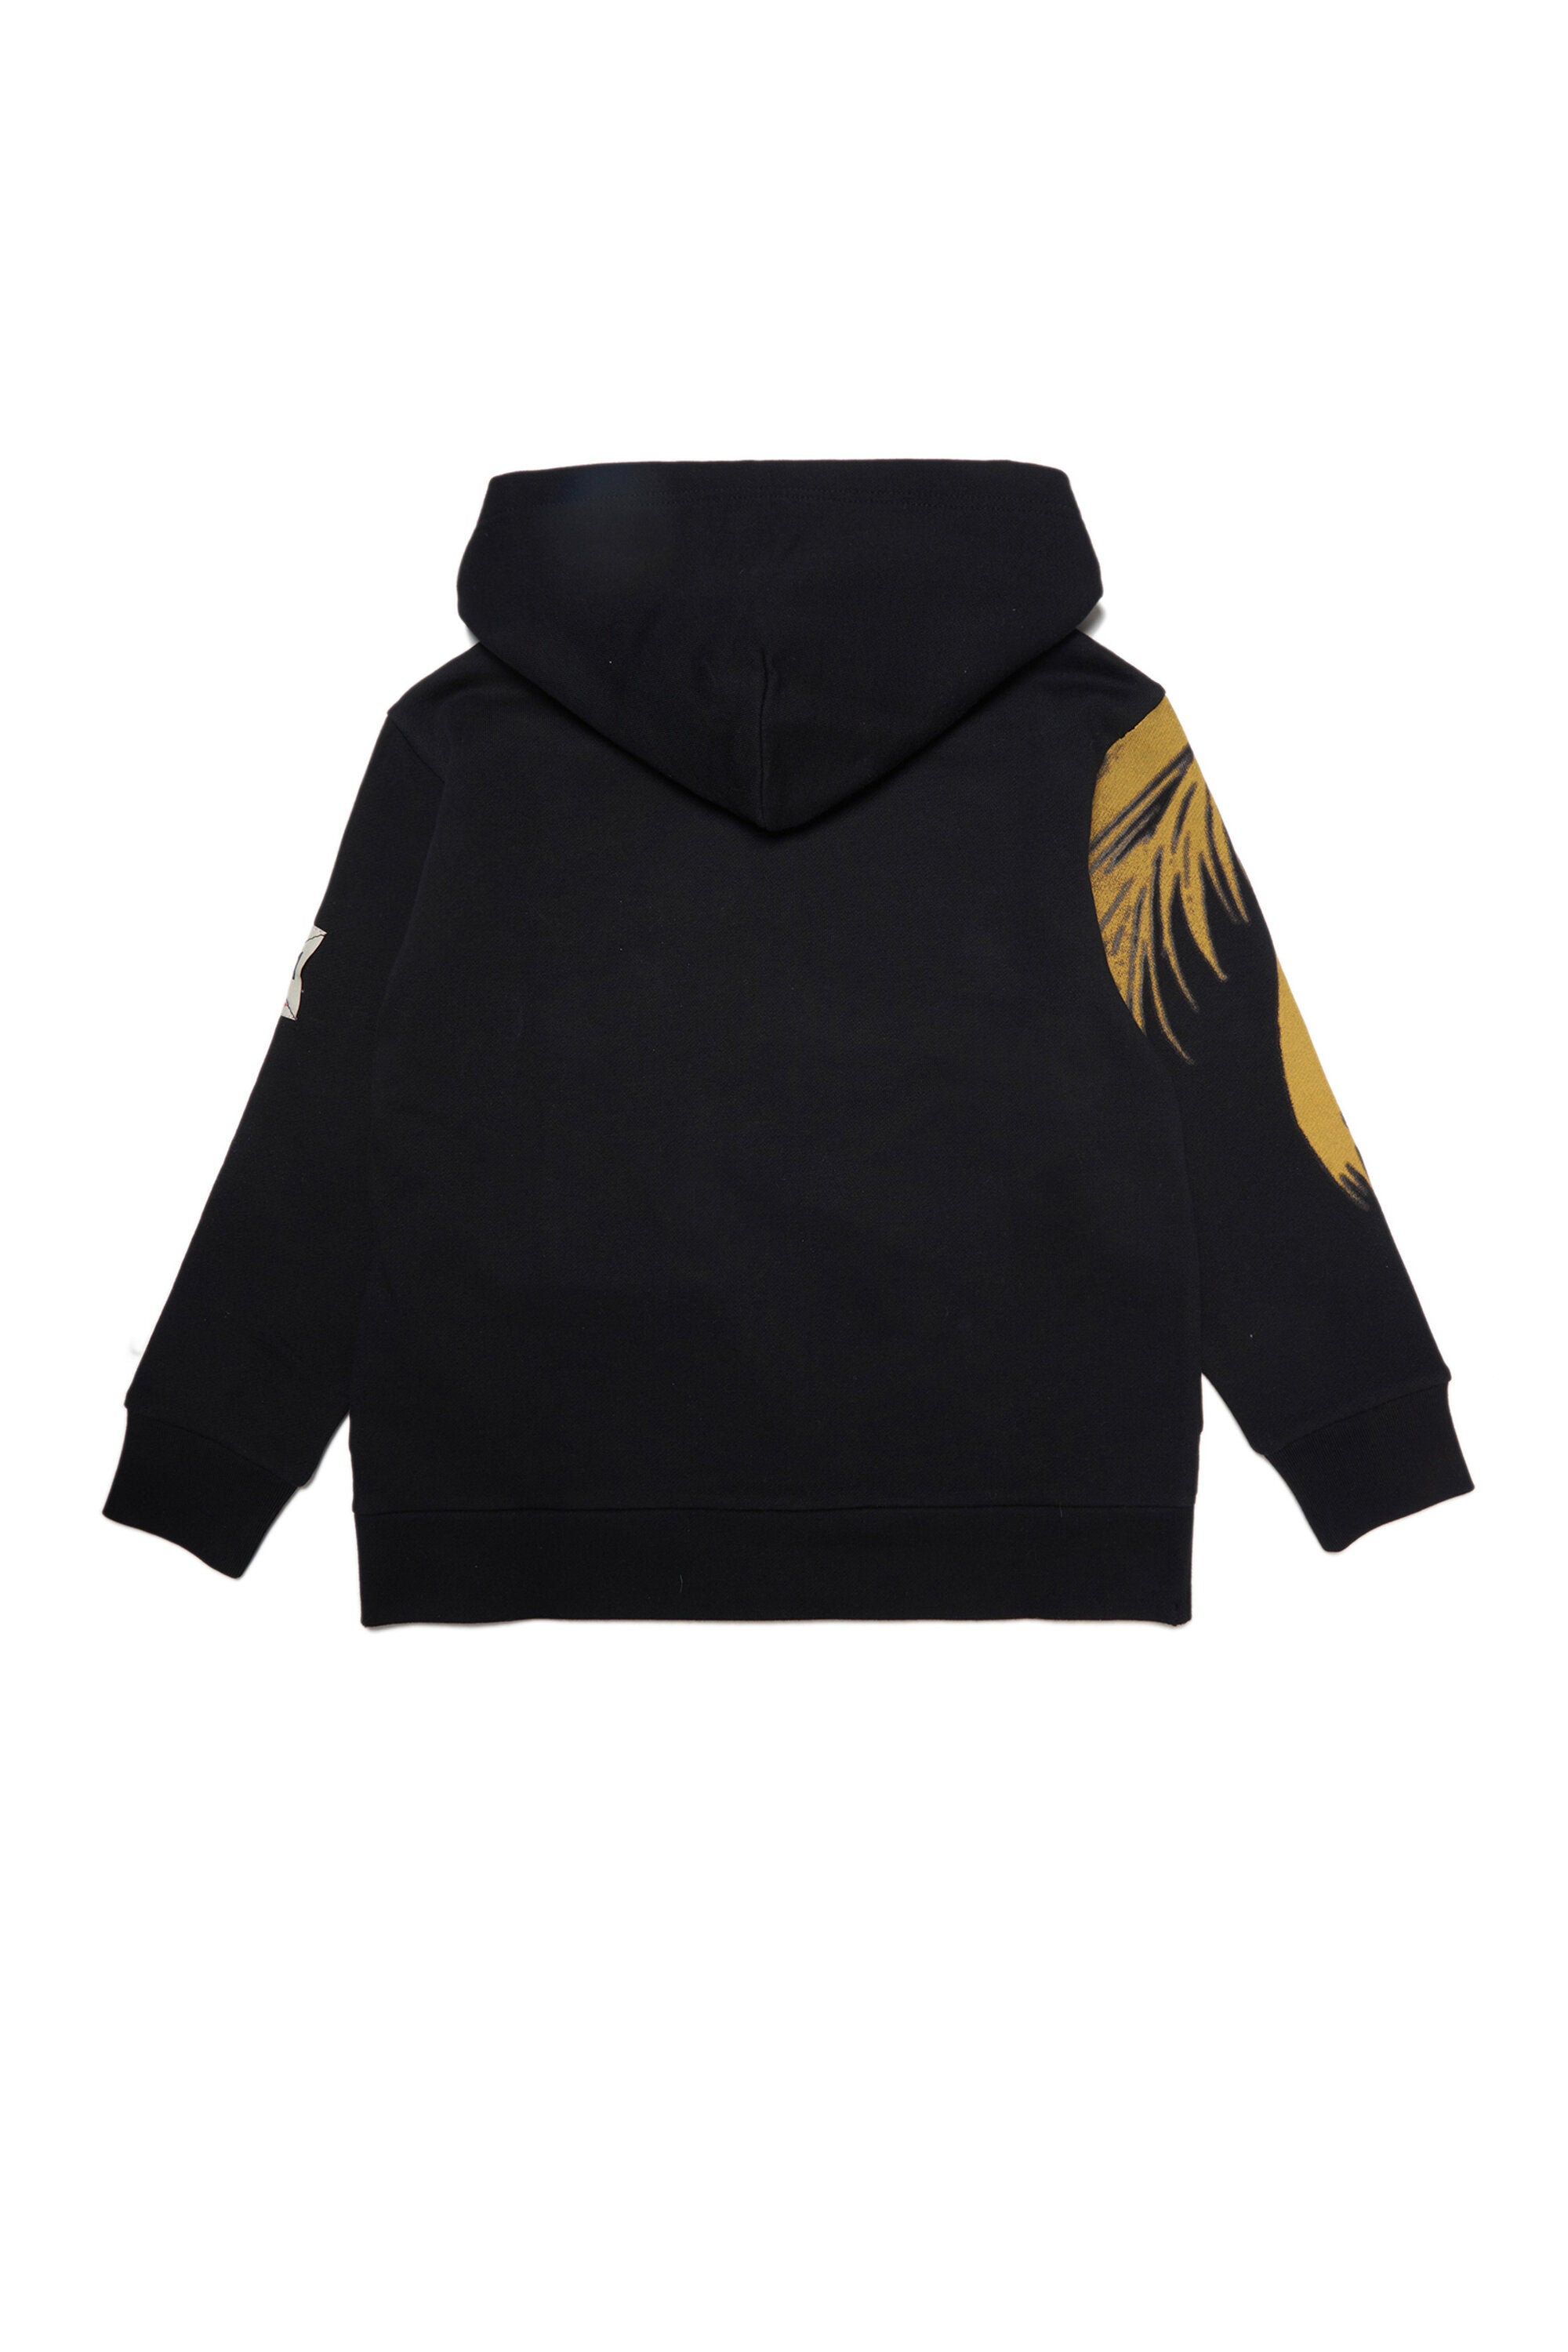 Black cotton hooded sweatshirt with zip and Summer print